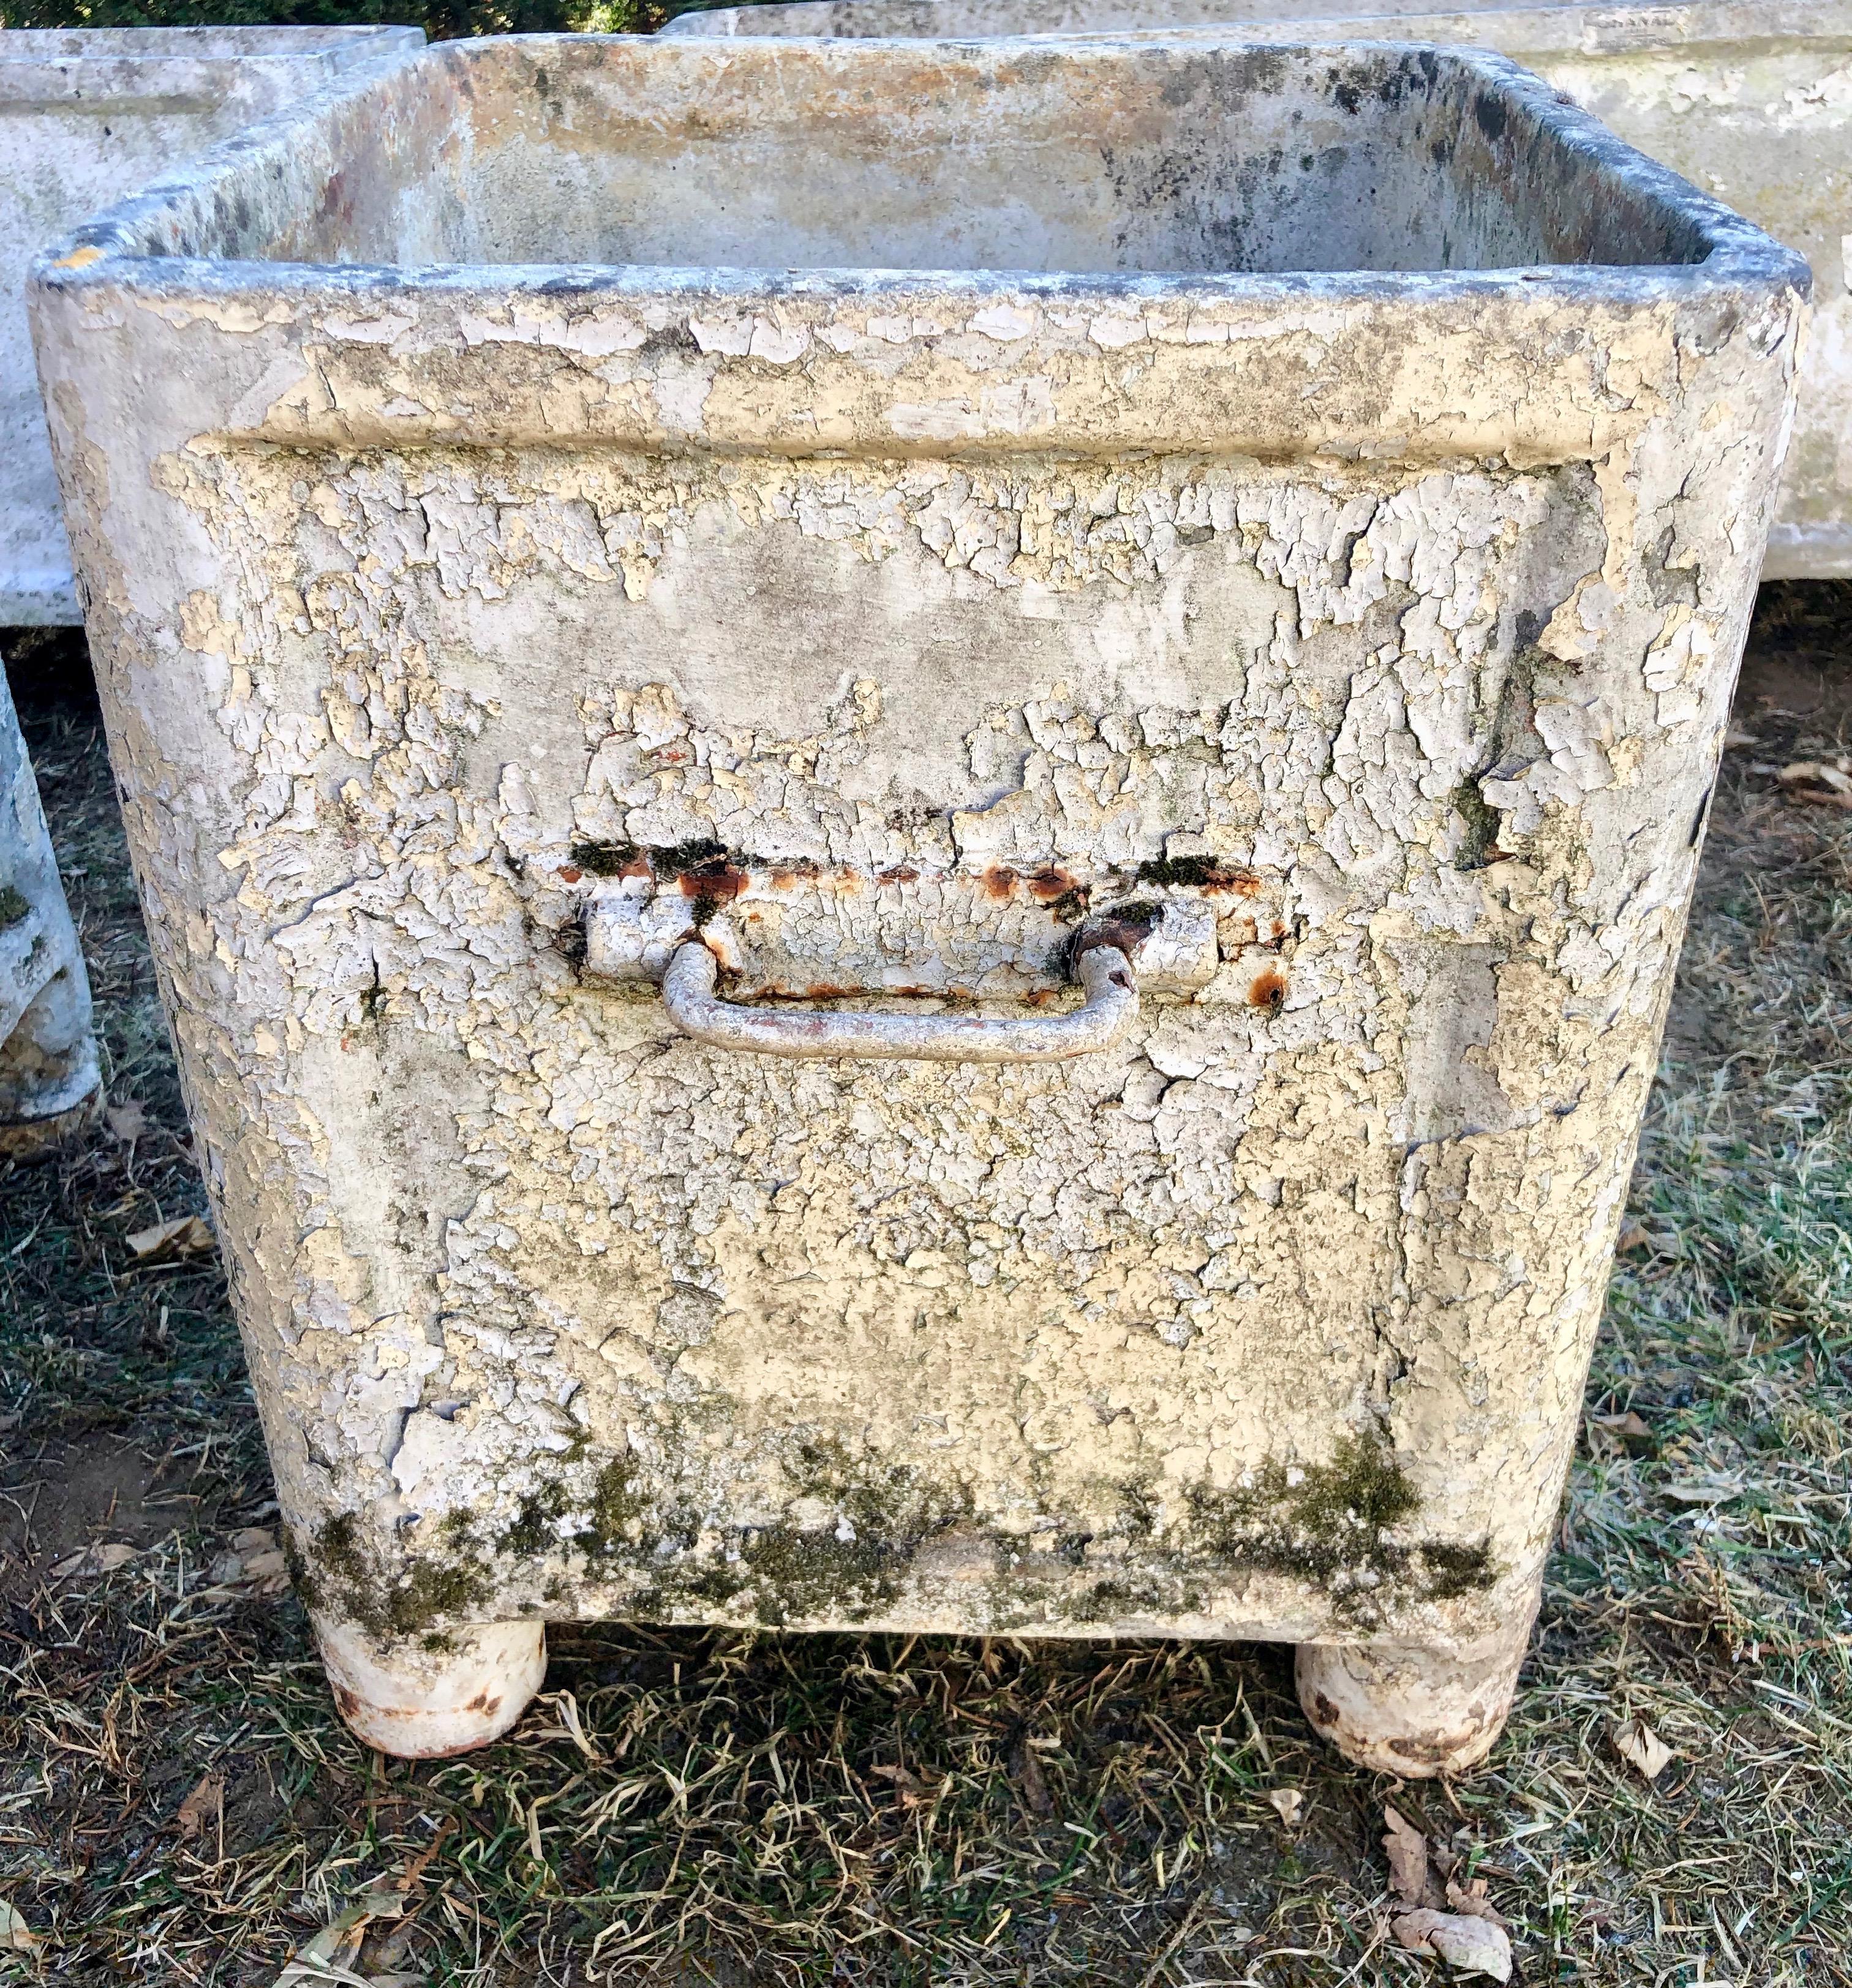 We see pieces by the famous French maker, Chanal, from time to time, but this pair of medium-sized square planters is wonderful for lovers of truly crusty patina. In an exceptional weathered and greening surface with traces of crusty white paint